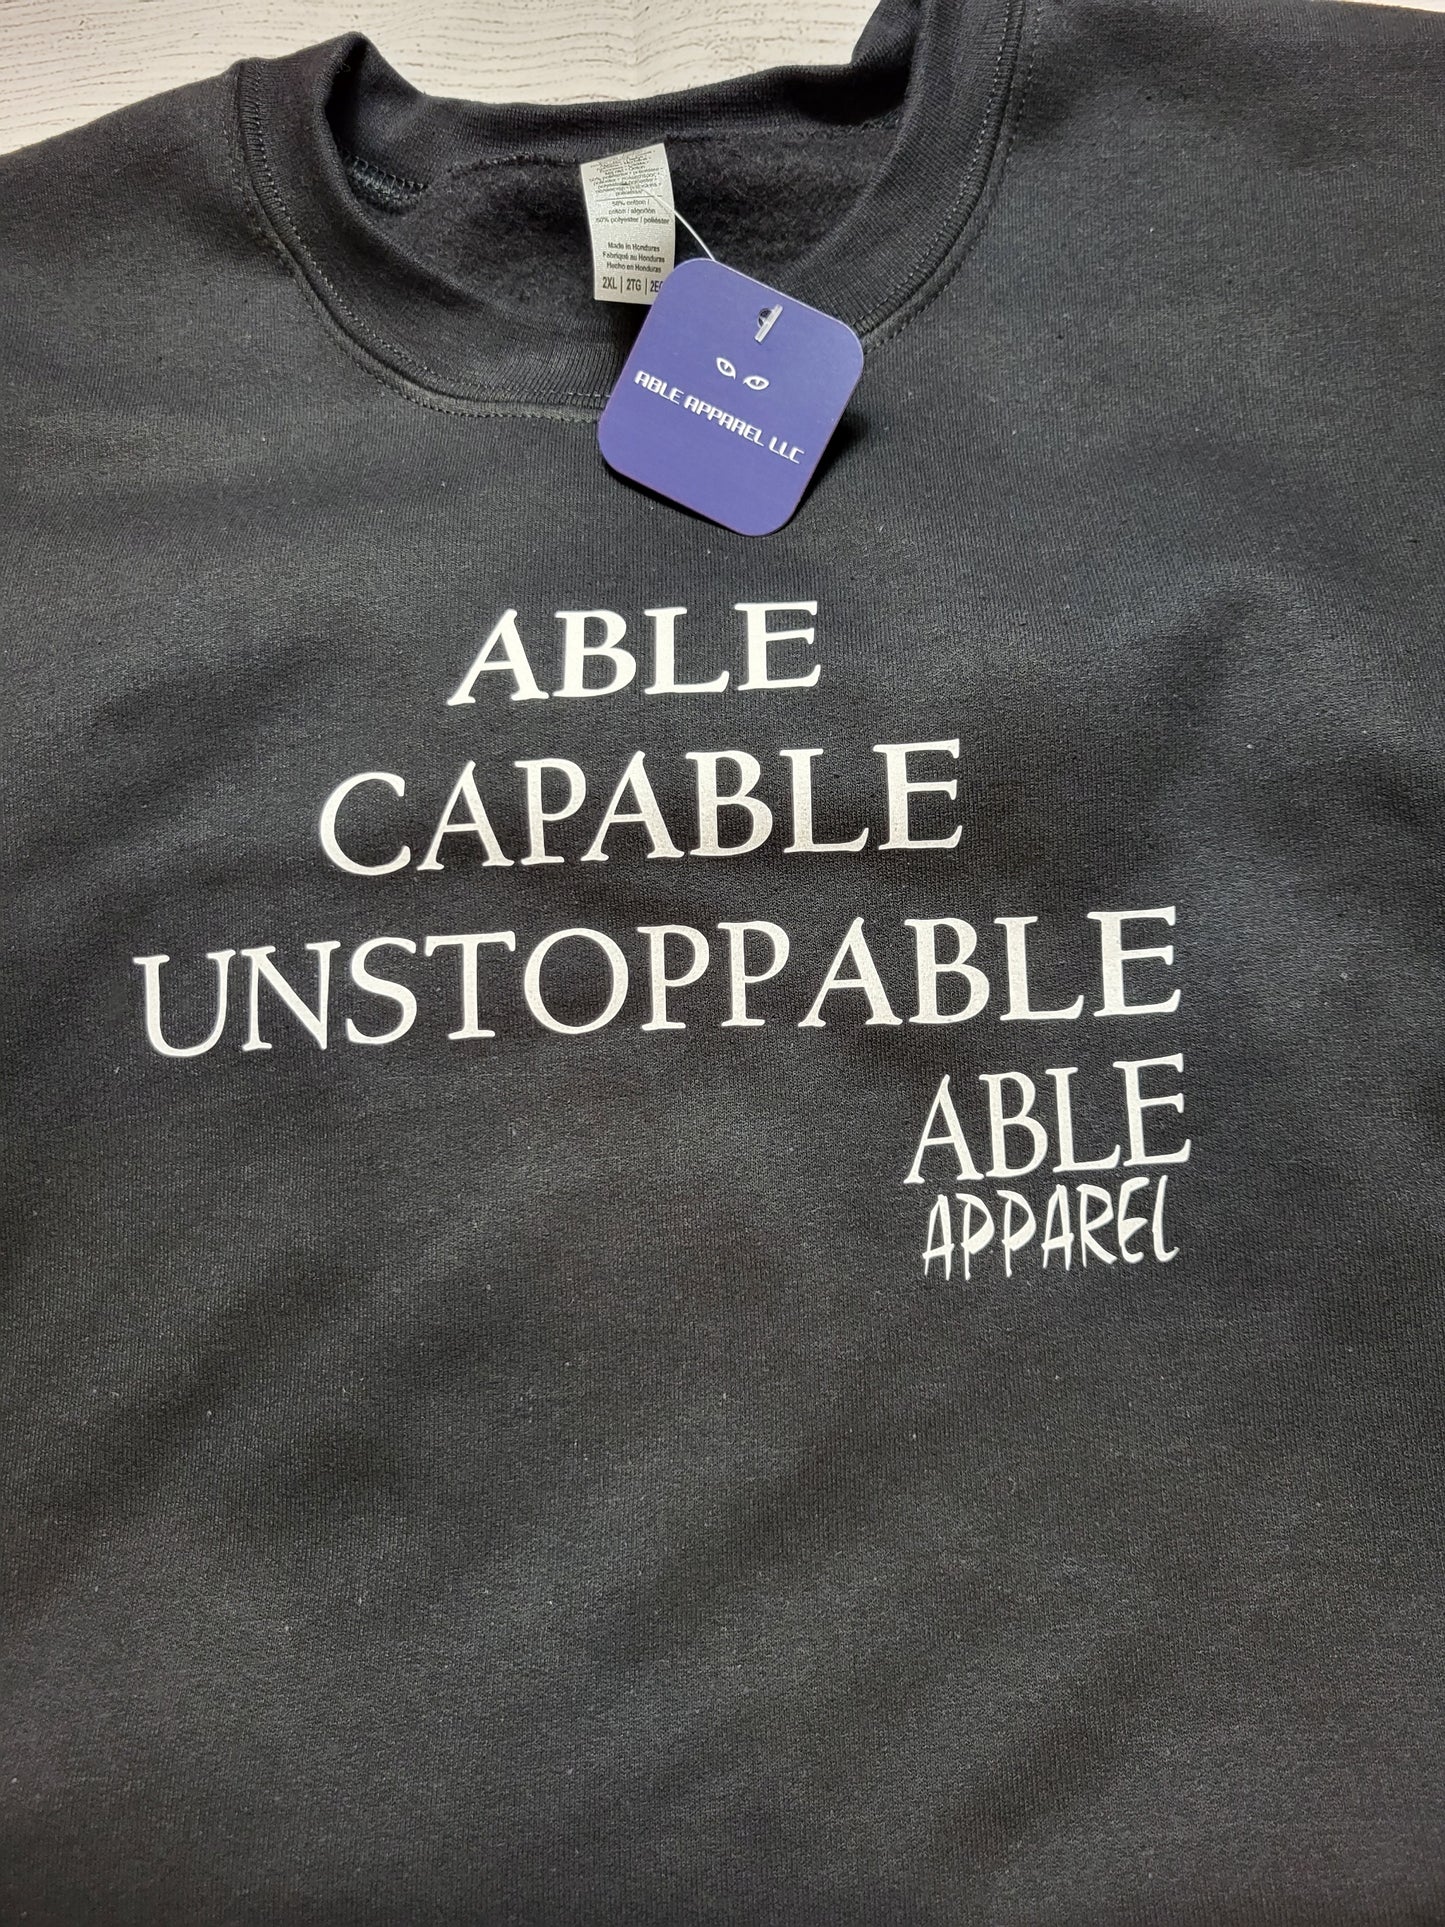 ABLE/CAPABLE/UNSTOPPABLE